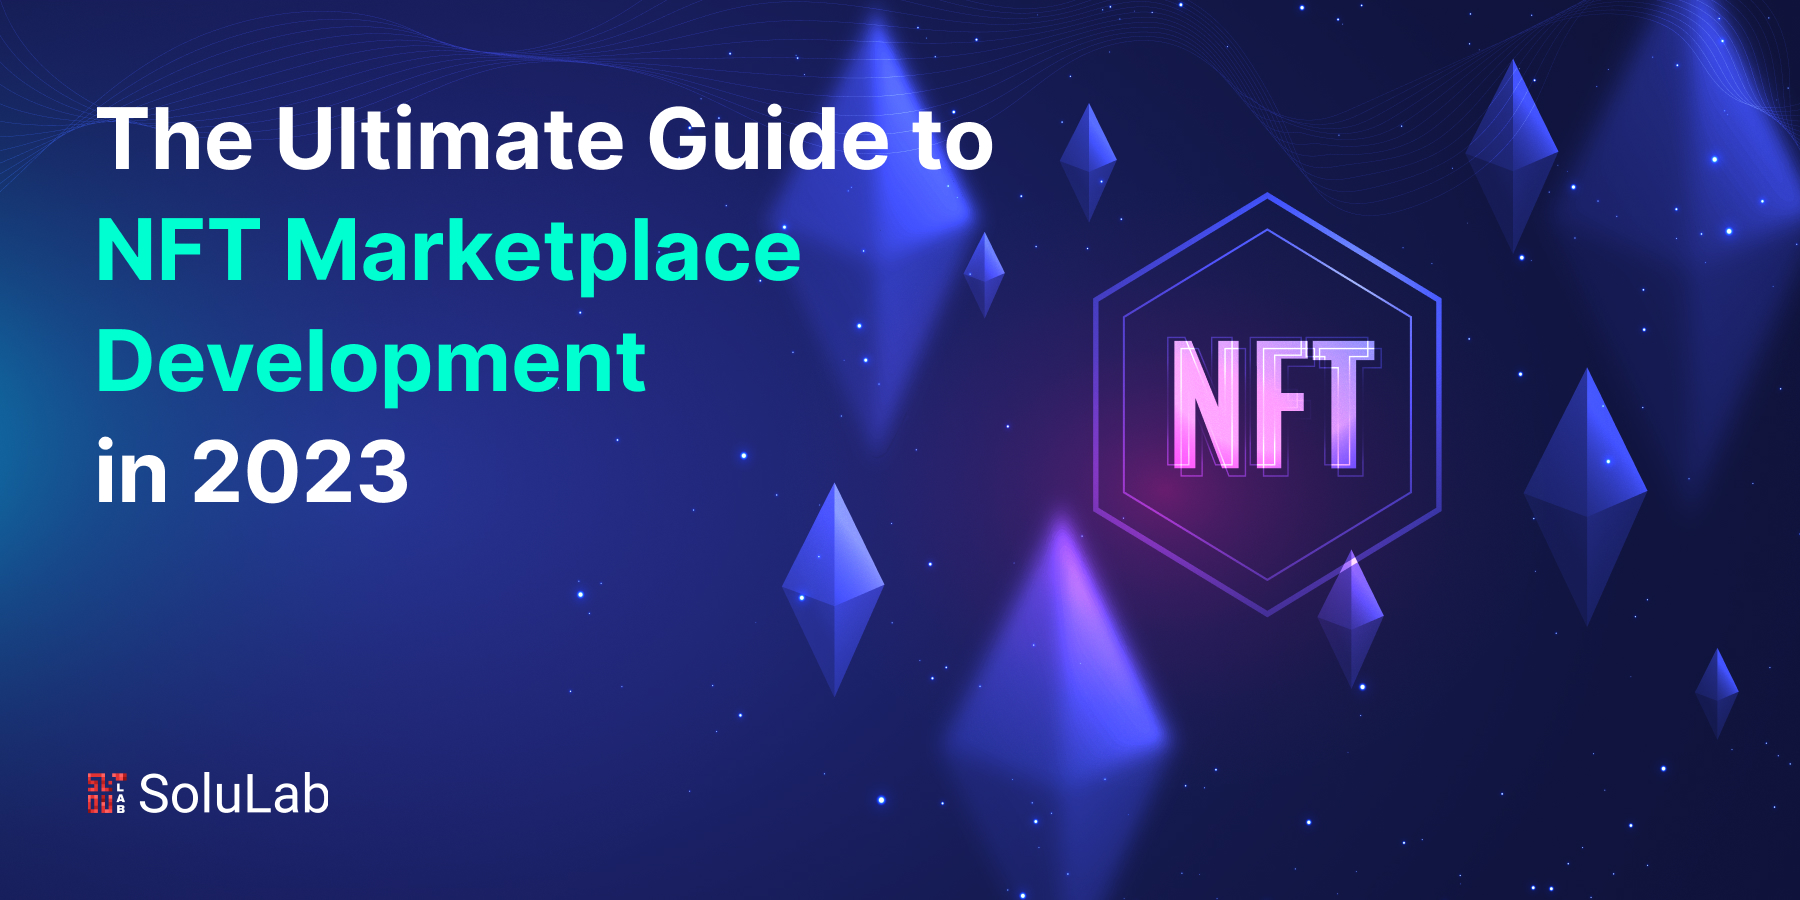 The Ultimate Guide to NFT Marketplace Development in 2023